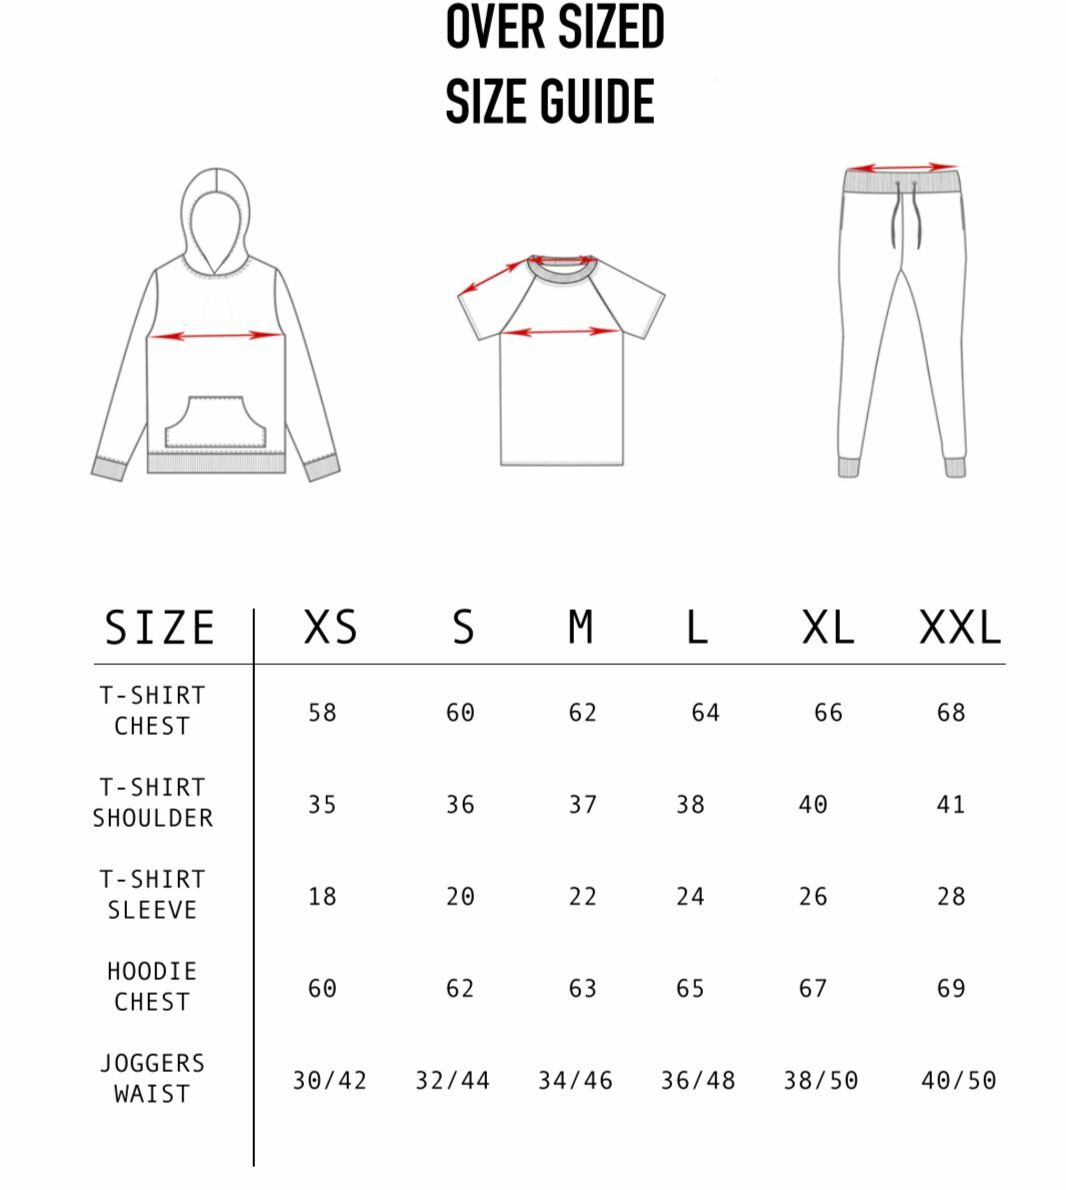 Oversized Size Guide